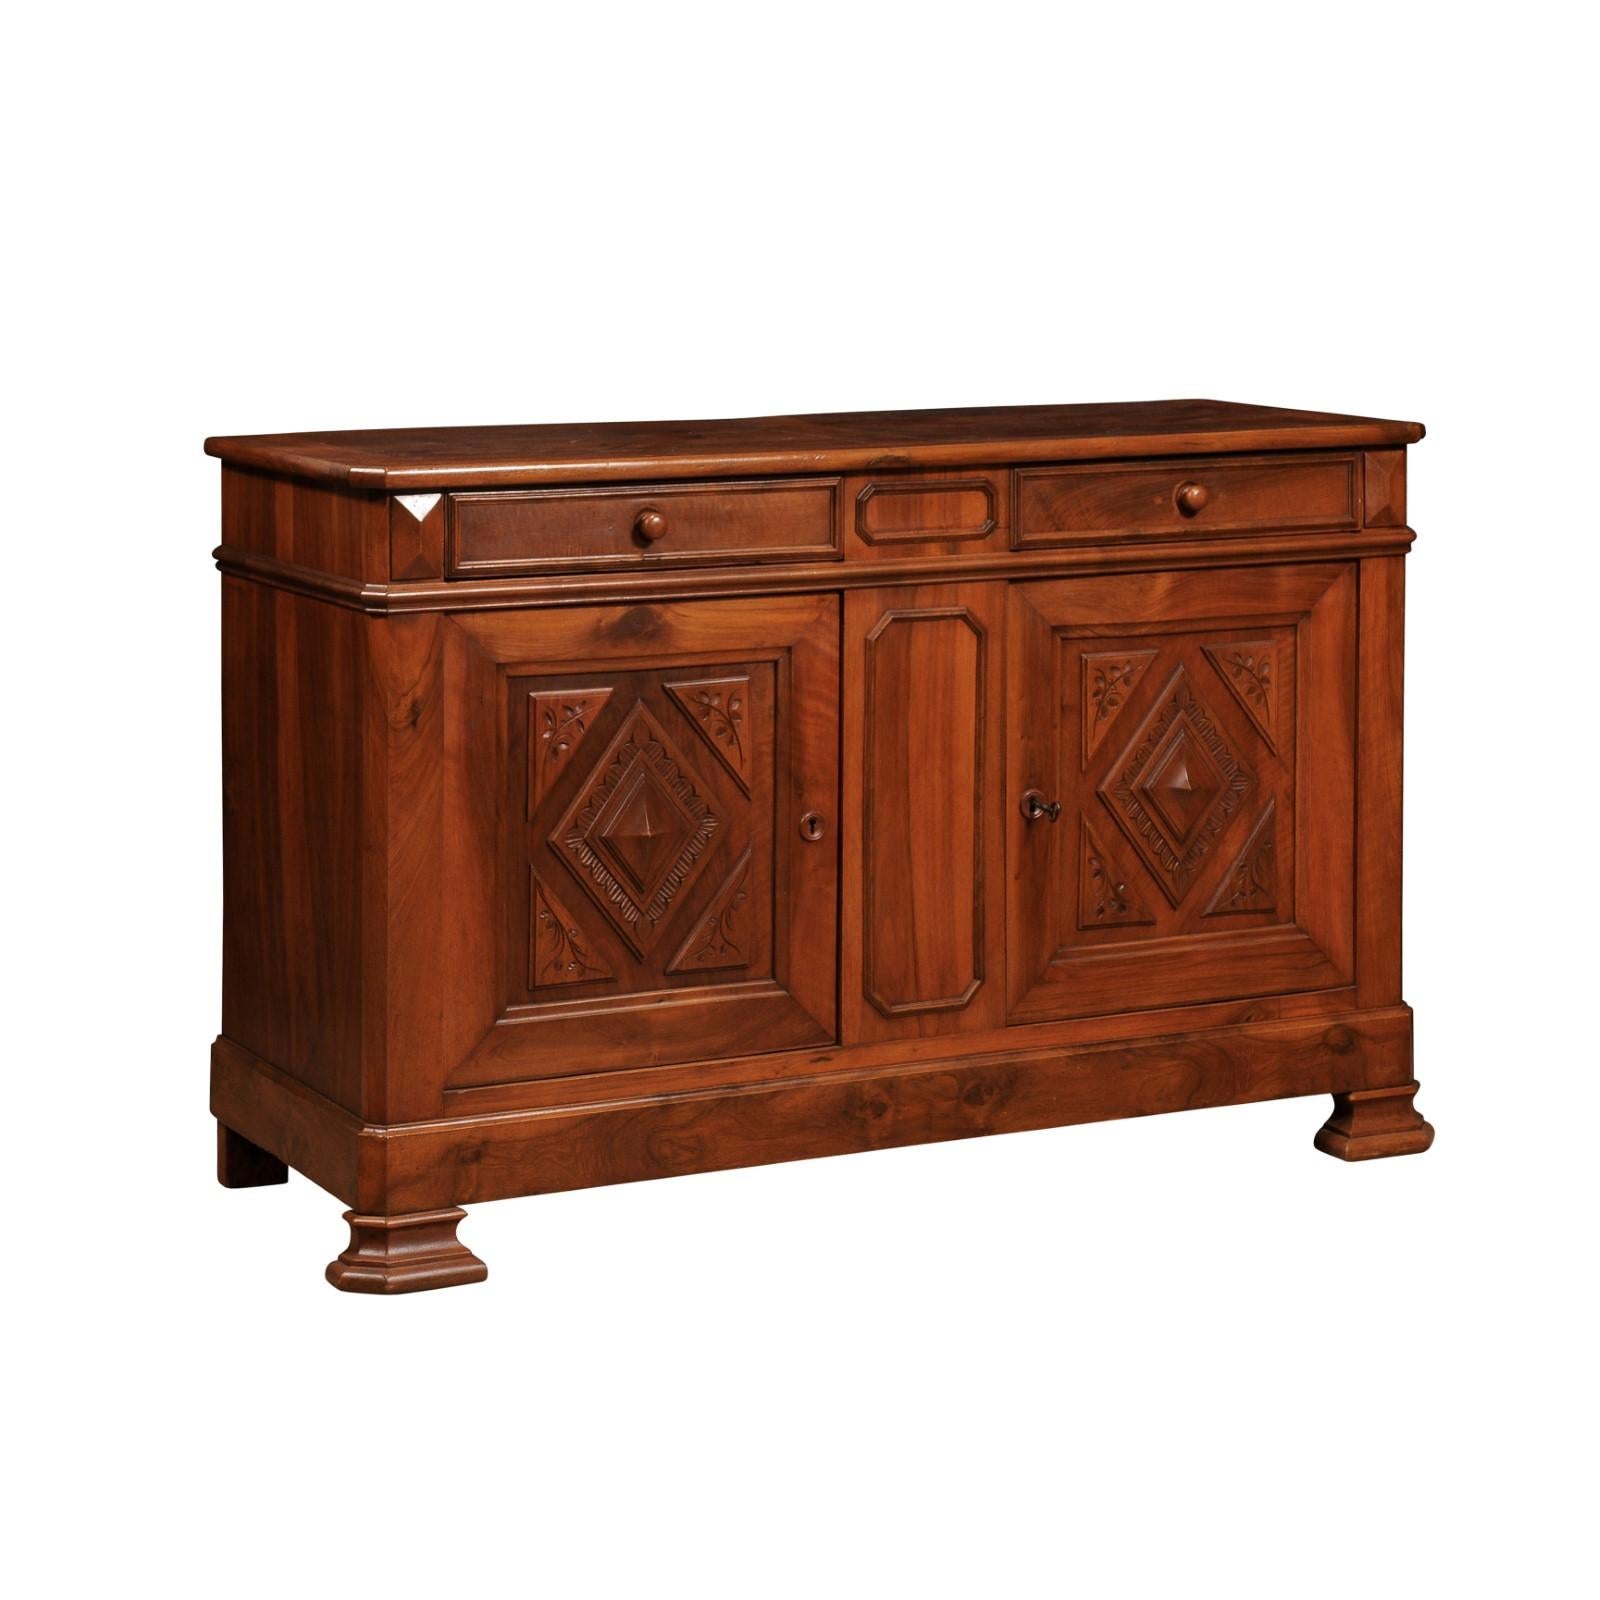 An Italian walnut buffet from the 19th century with two drawers over two doors, carved diamonds and floral motifs. This 19th-century Italian walnut buffet exudes classic elegance and refined craftsmanship. The piece features a harmonious blend of